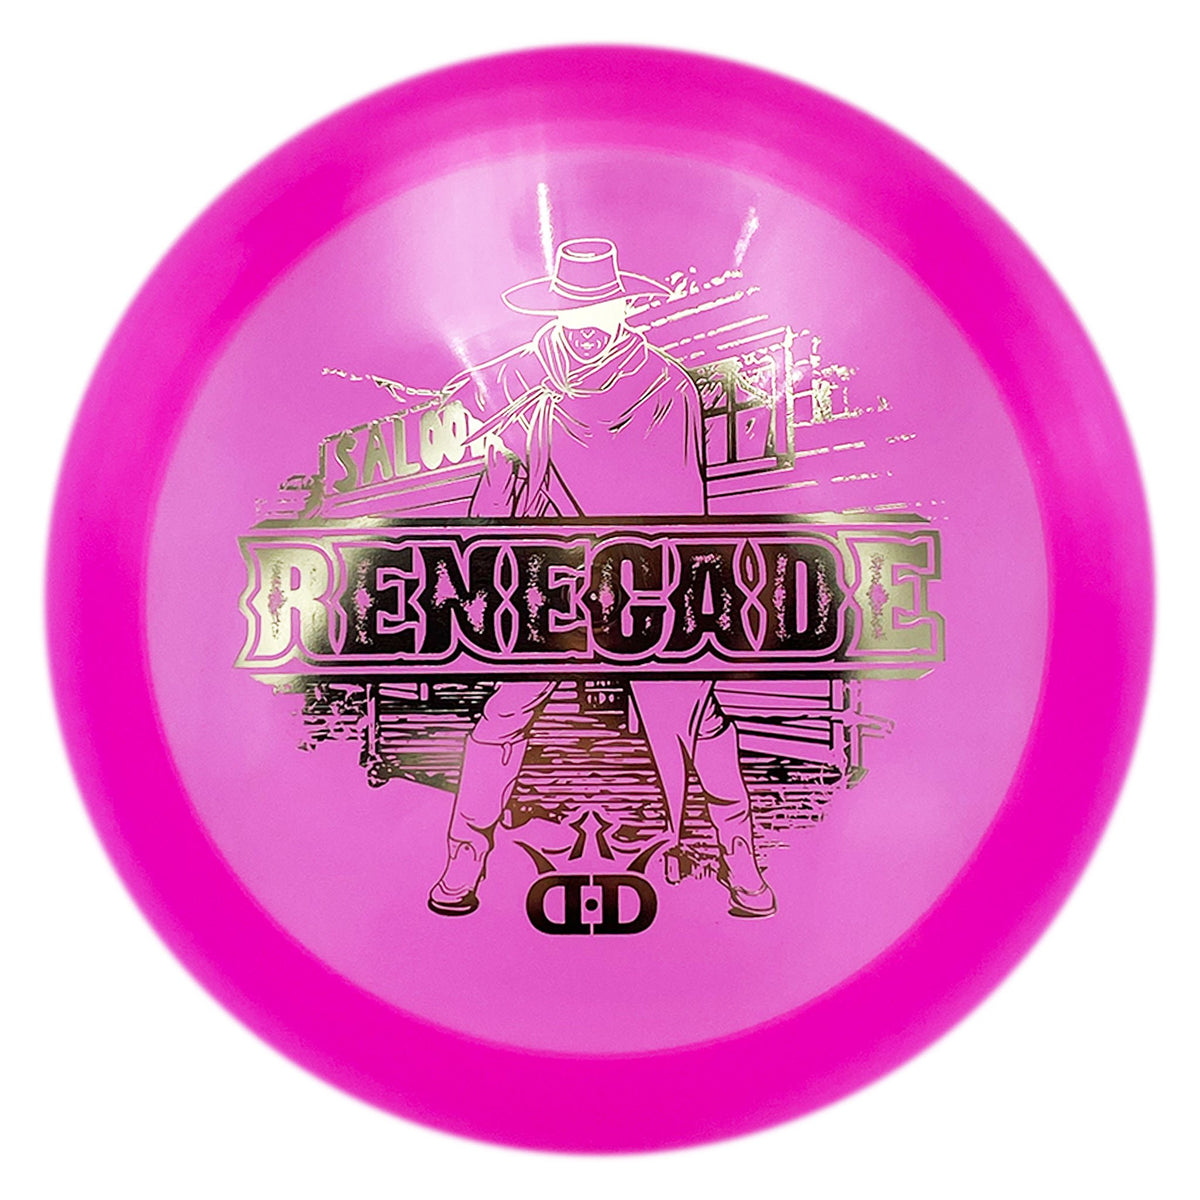 Disc Golf Dynamic Discs Lucid Renegade Limited Edition Stamp distance driver Pink